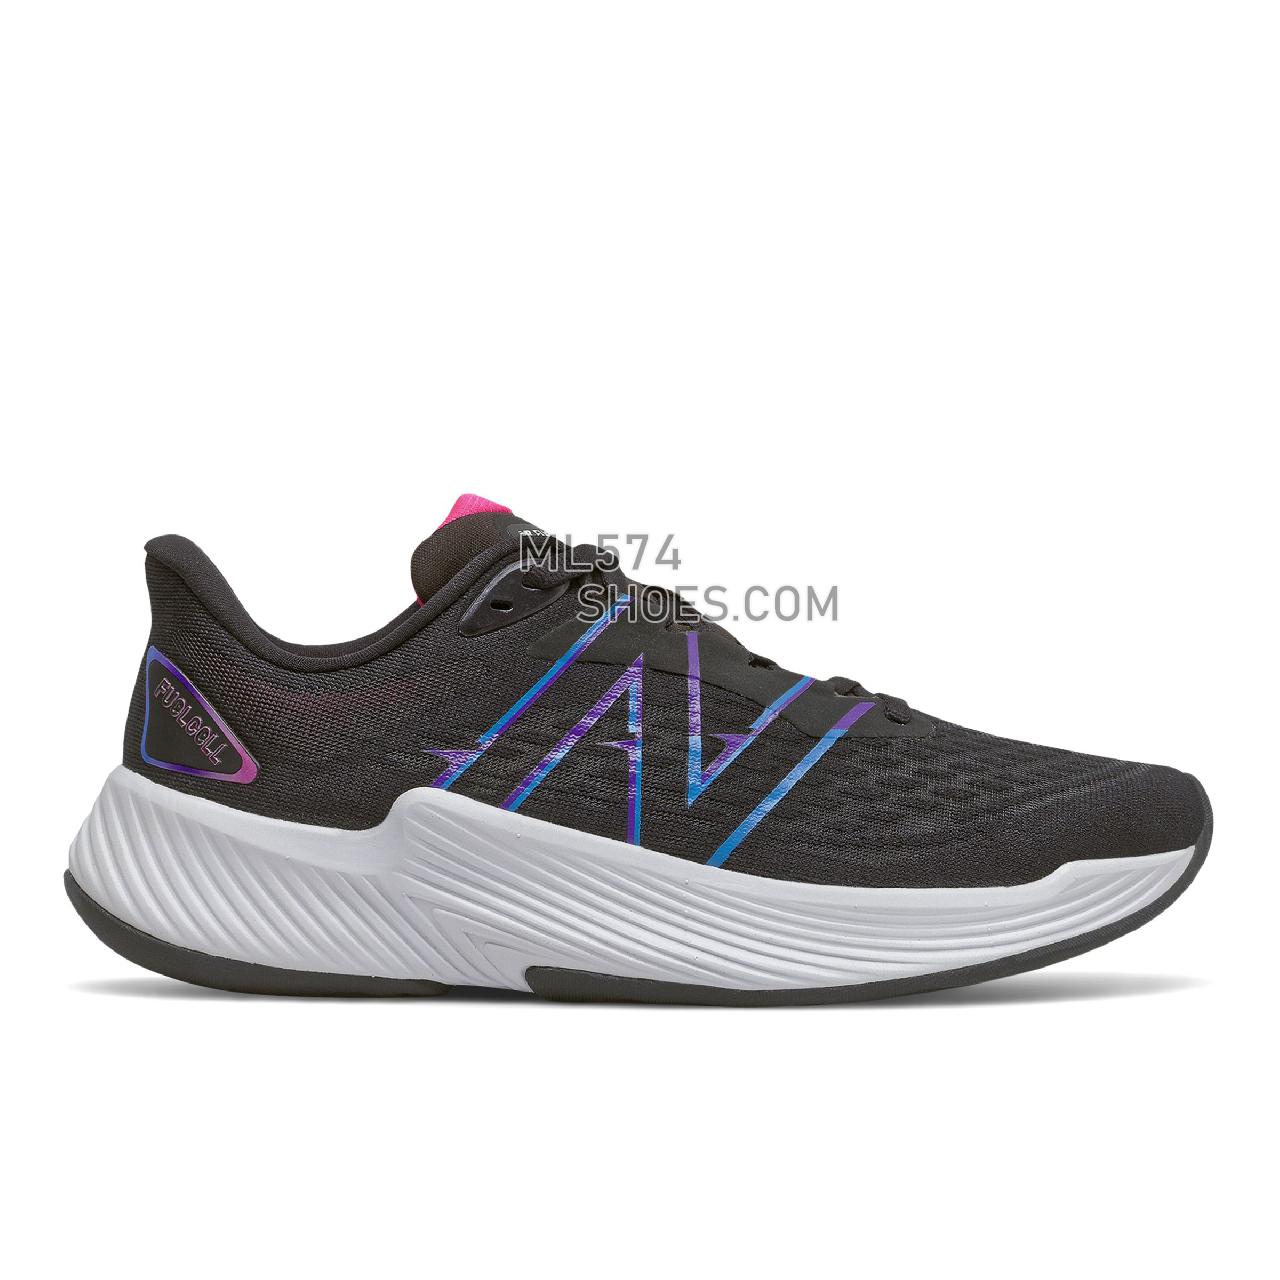 New Balance FuelCell Prism v2 - Women's Stability Running - Black with Deep Violet - WFCPZLB2